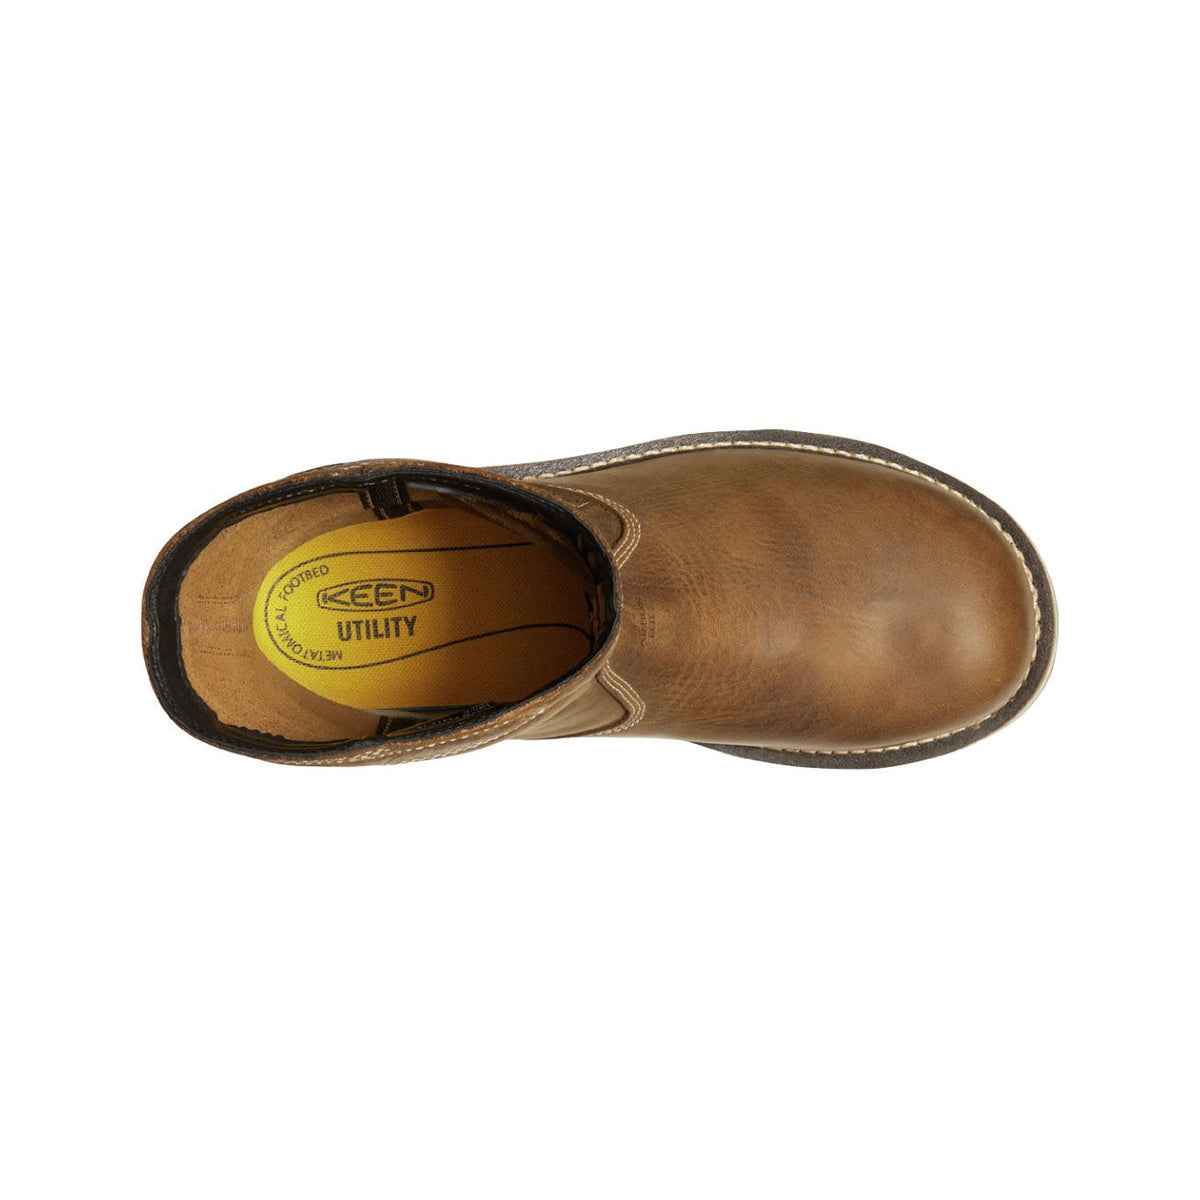 Top view of a single Keen brown leather work shoe with black soles and a removable dual-density footbed, featuring a visible &quot;KEEN UTILITY&quot; label on the insole.